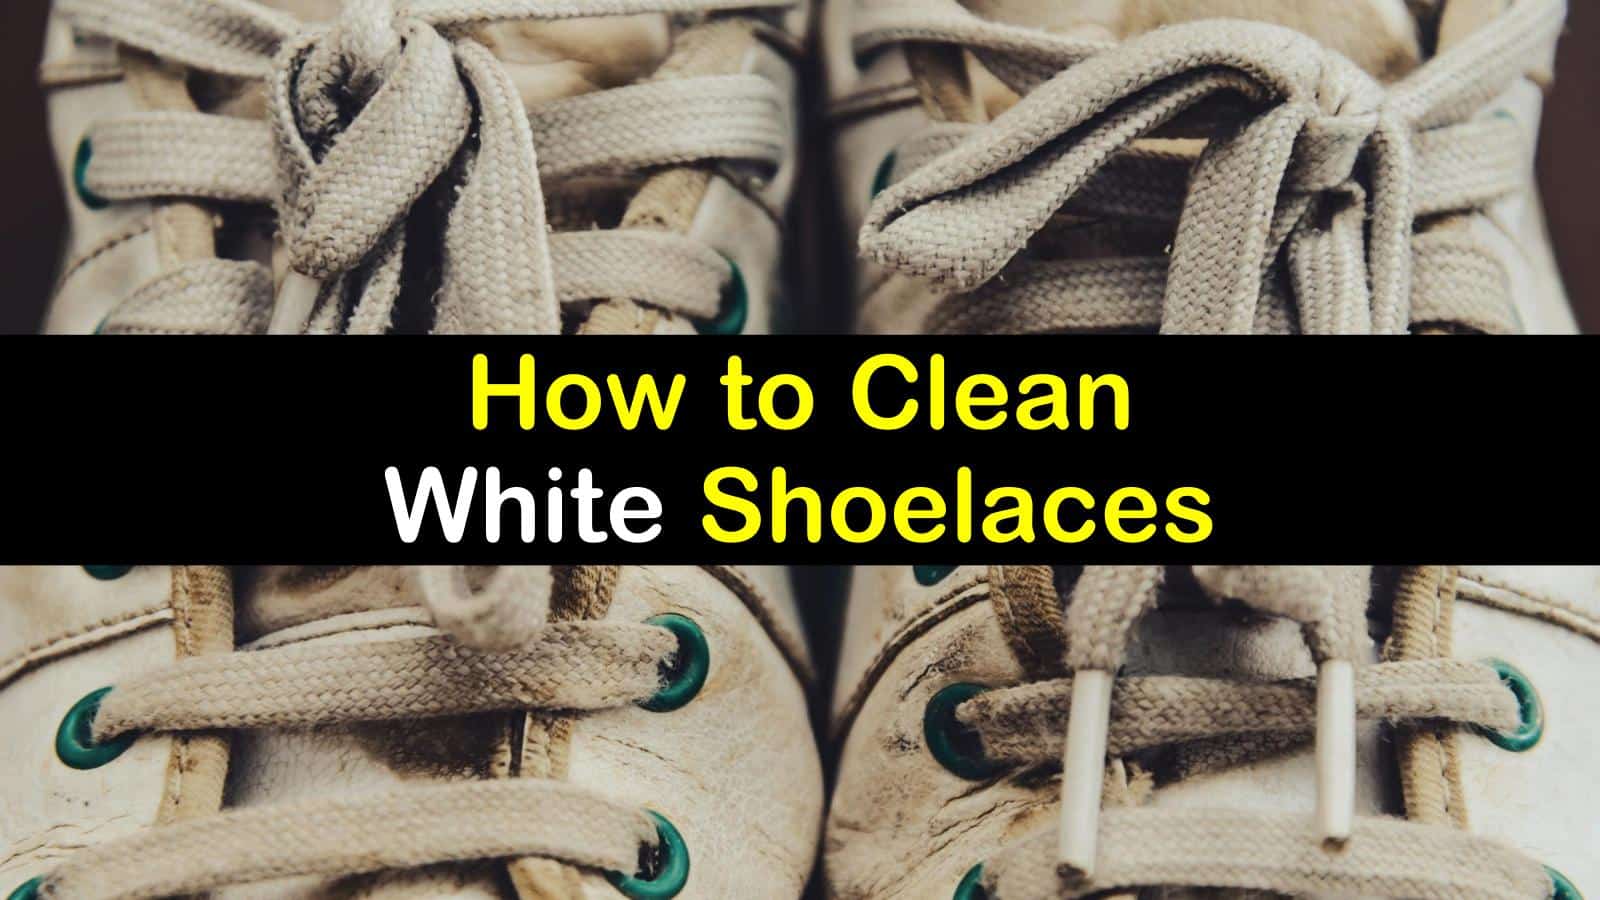 5 Quick Ways to Clean White Shoelaces